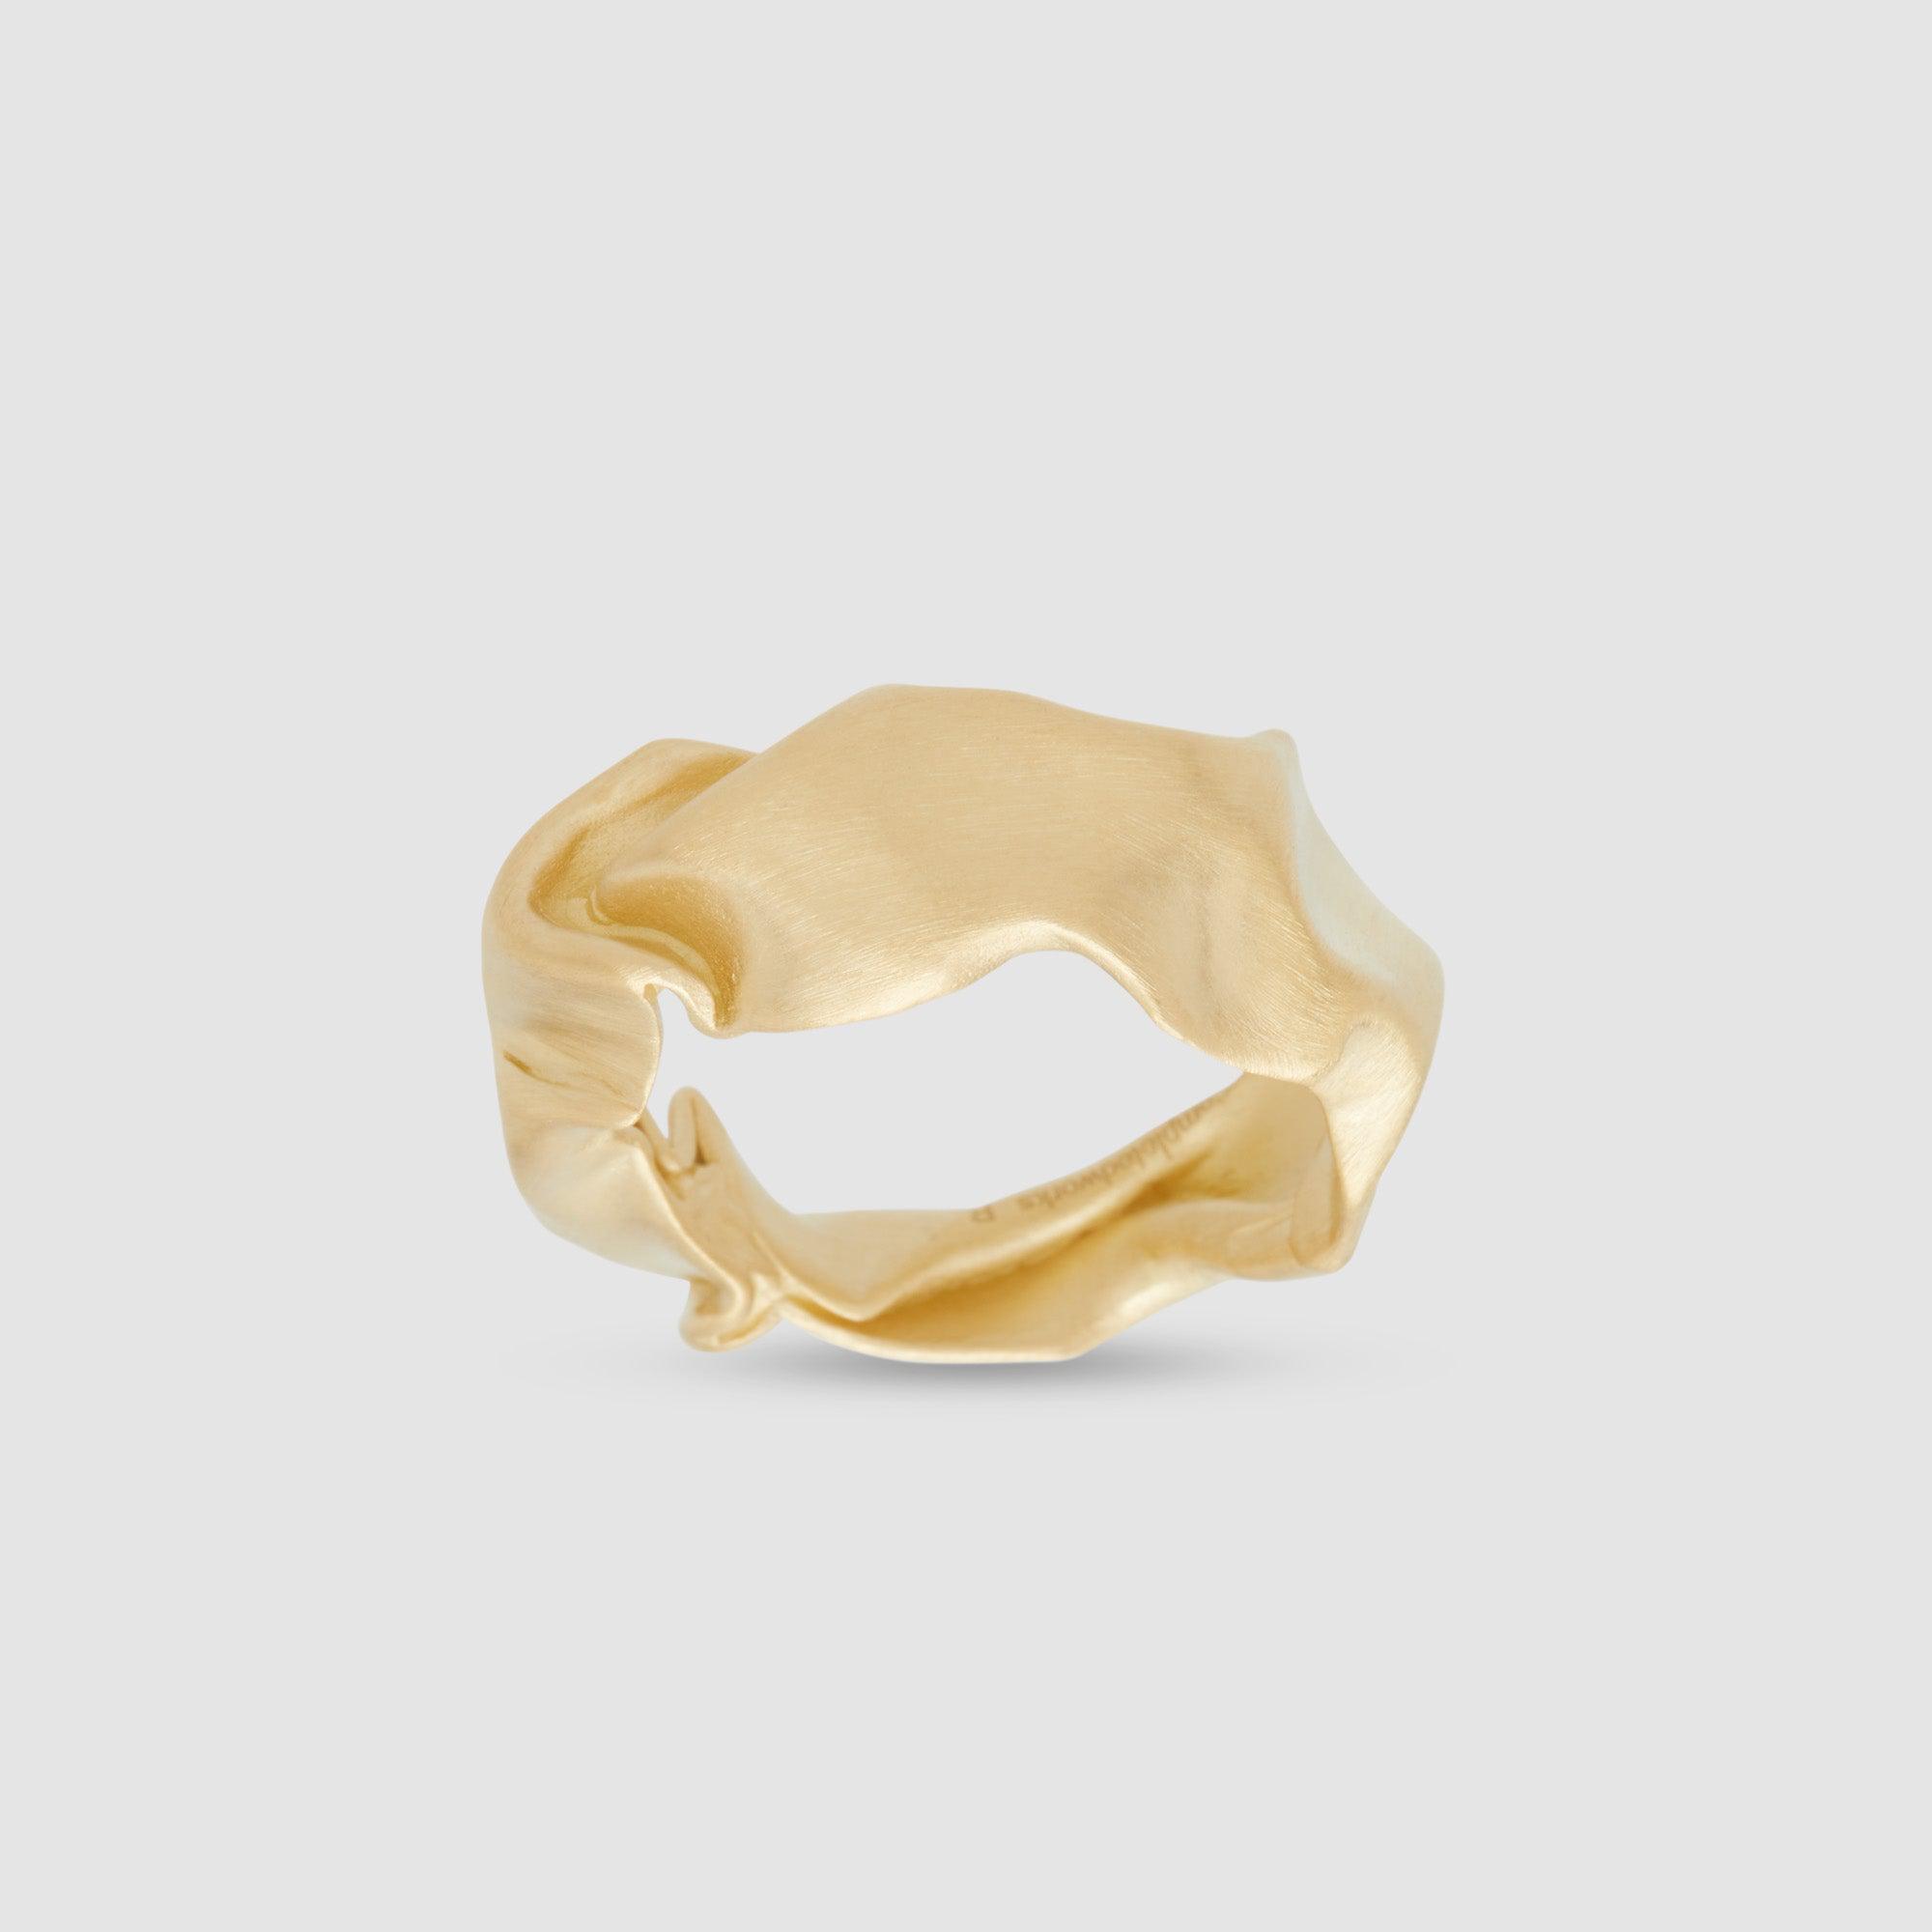 Completed Works  Gold Crunched Ring by COMPLETEDWORKS